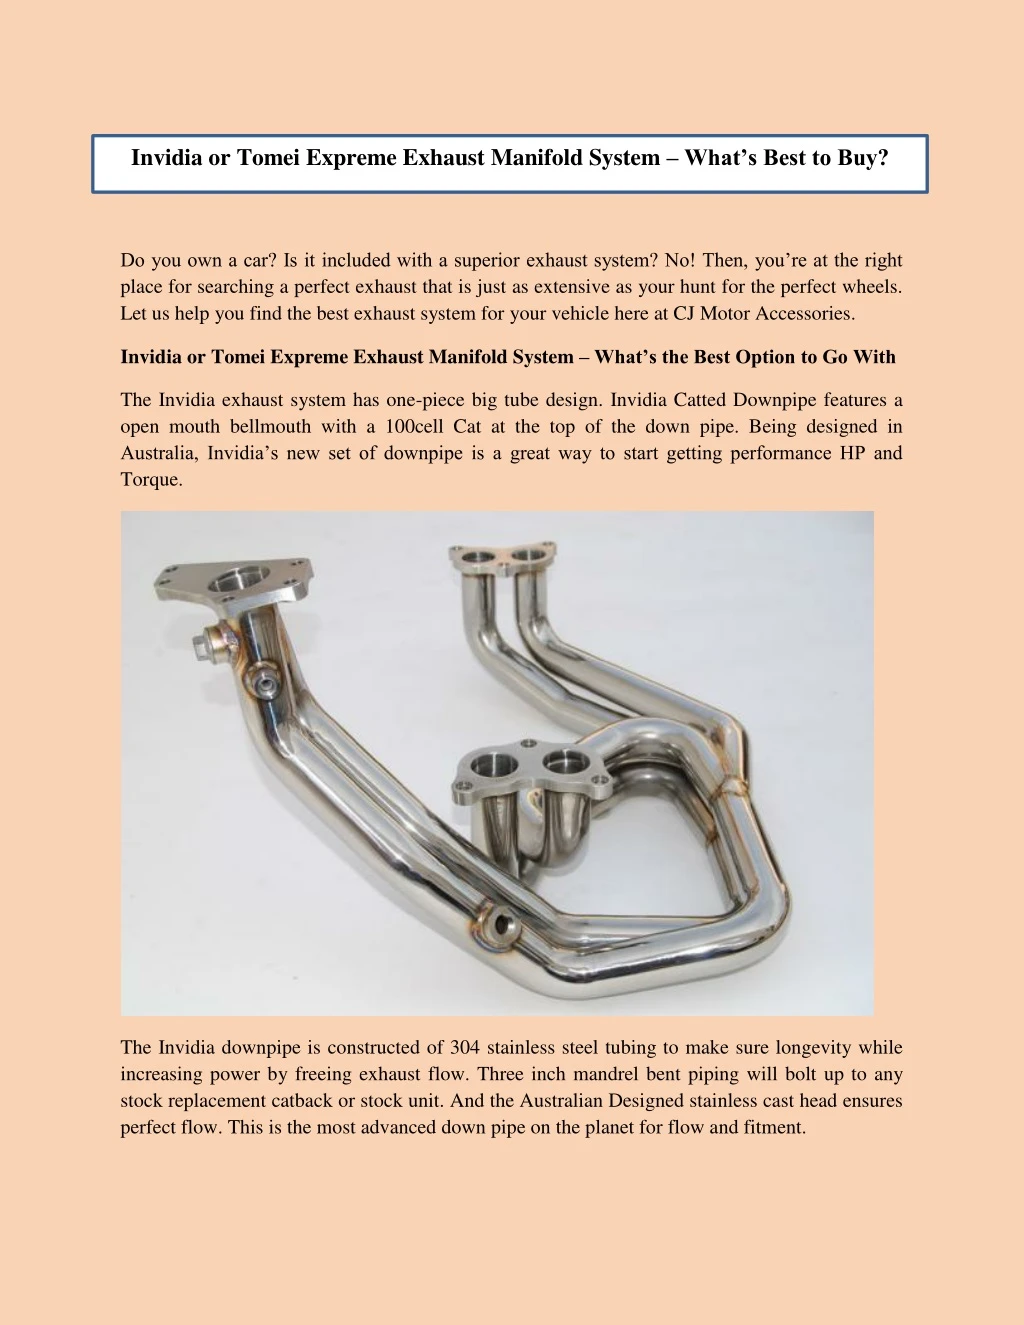 invidia or tomei expreme exhaust manifold system